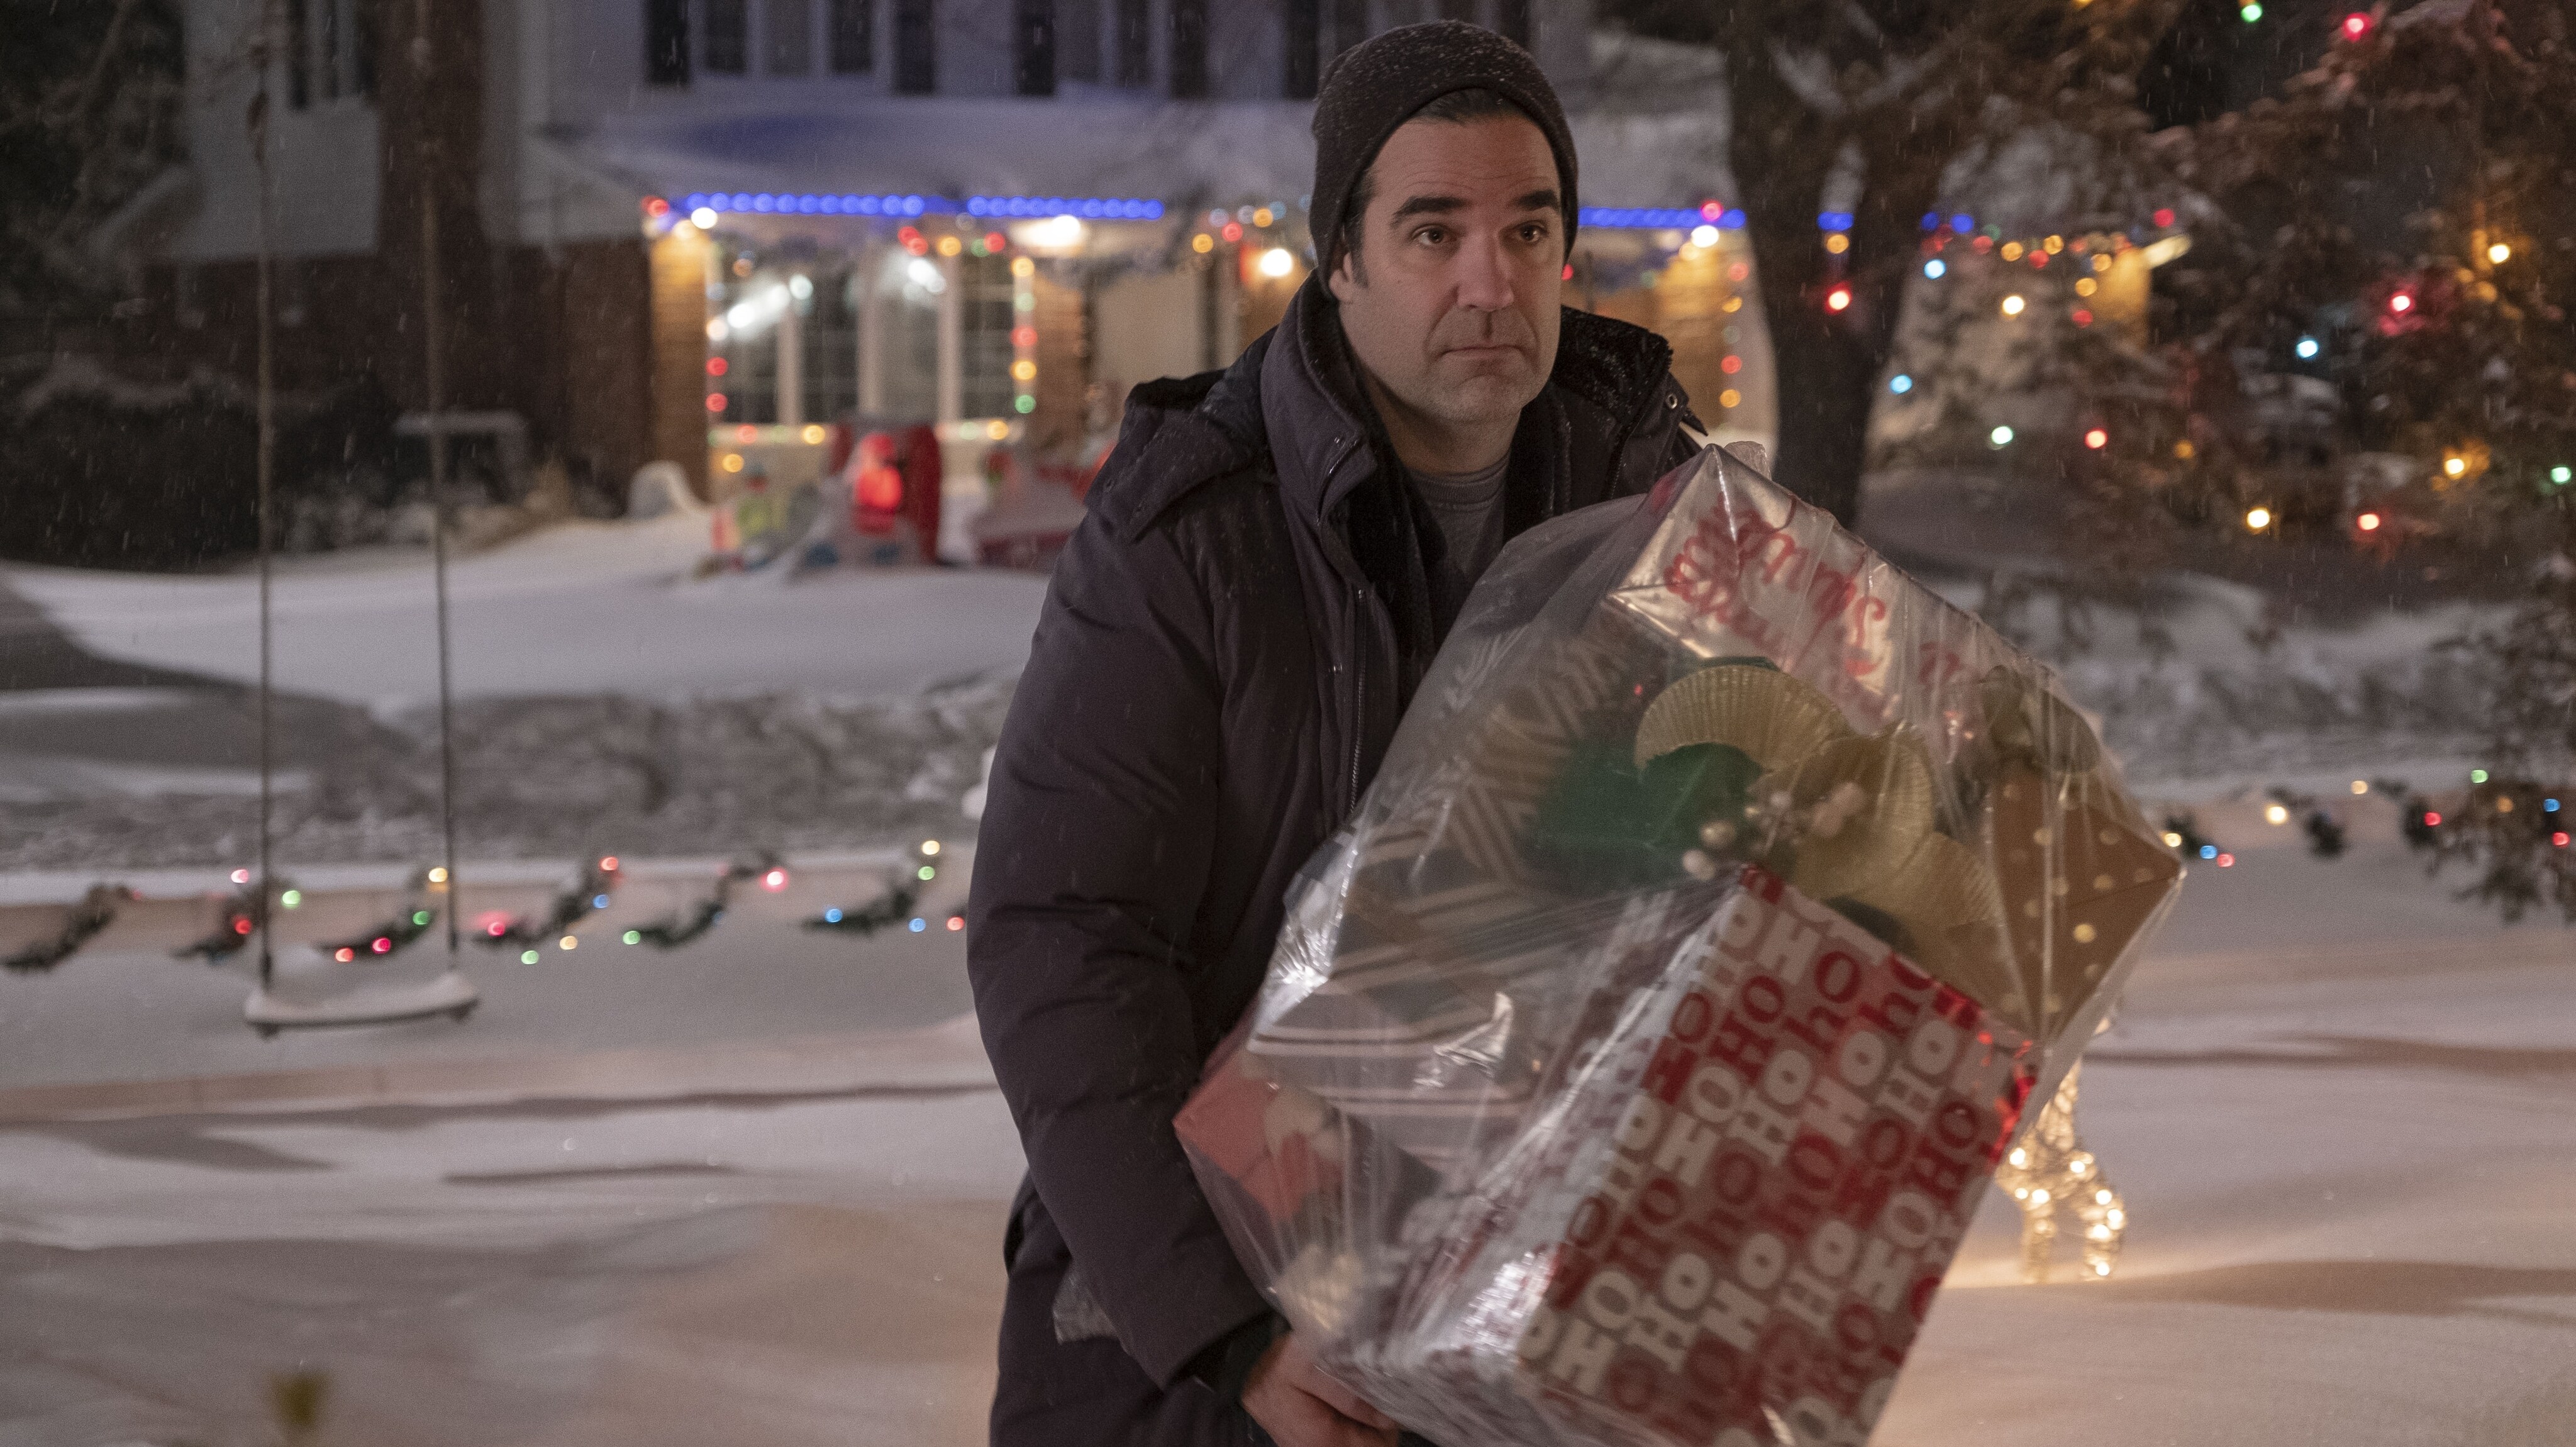 Rob Delaney as Jeff in HOME SWEET HOME ALONE, exclusively on Disney+. Photo by Philippe Bosse. ©2021 20th Century Studios. All Rights Reserved.